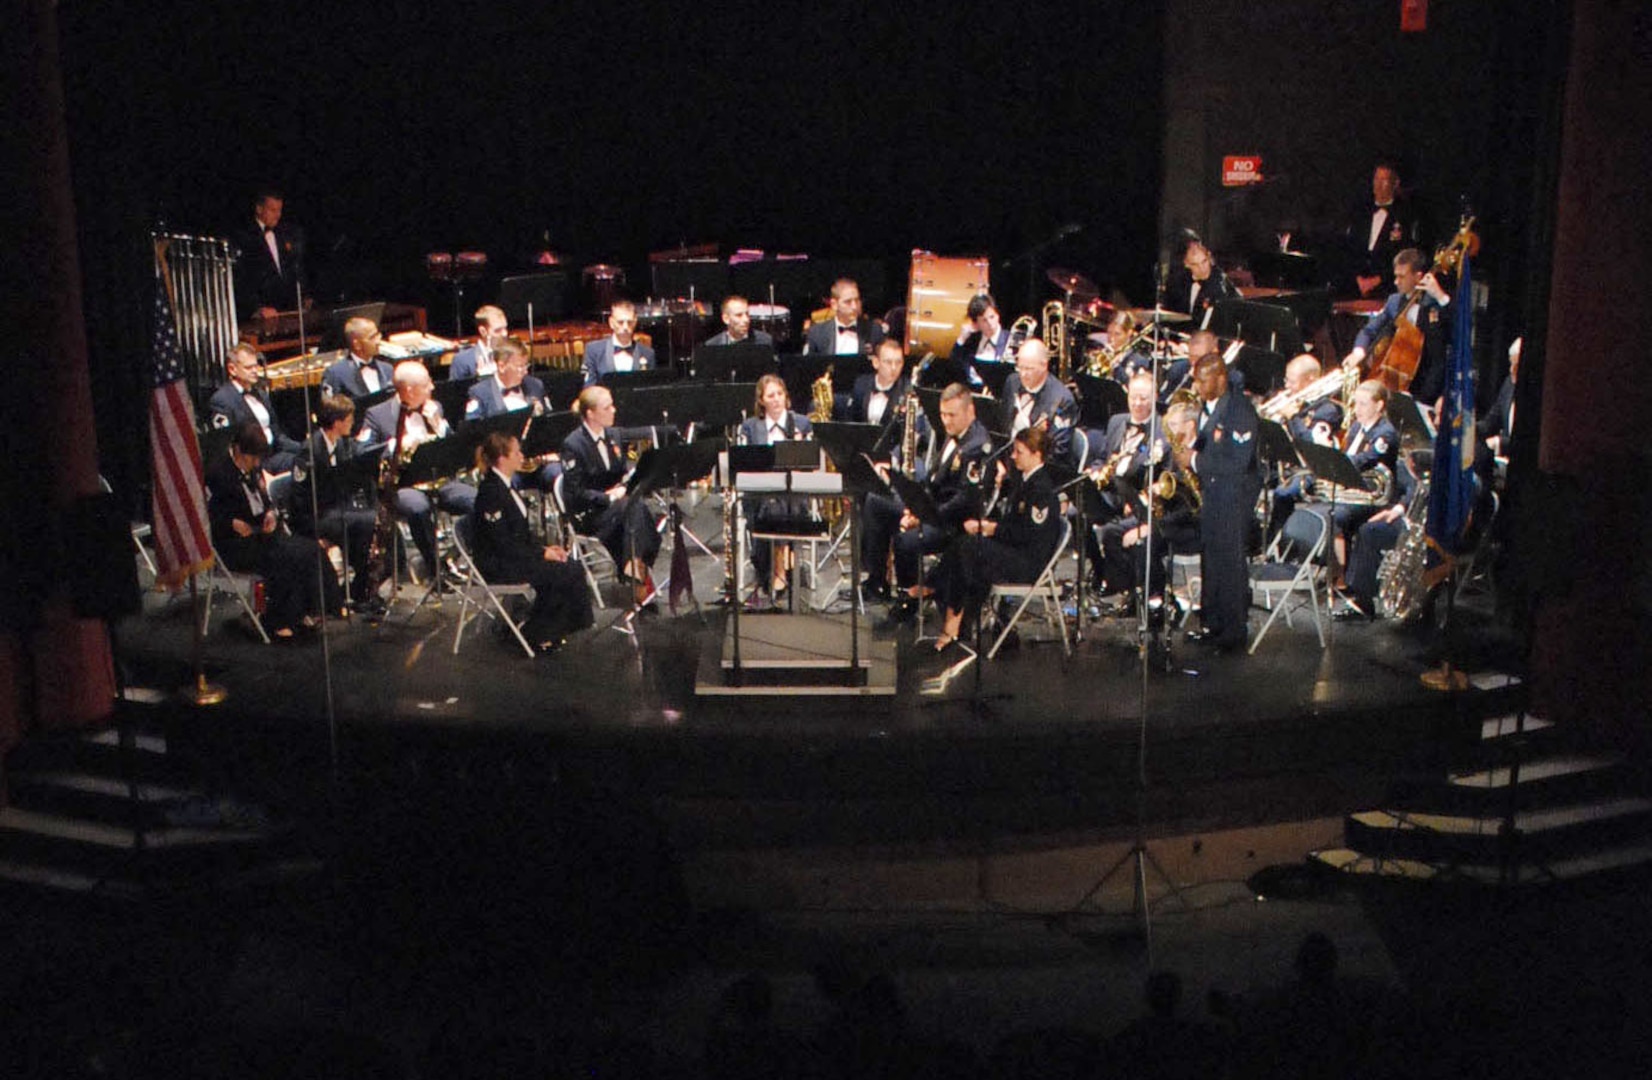 LAUGHLIN AIR FORCE BASE, Texas – The Air Force Band of the West performs theme songs from various spy films including Mission Impossible, Pink Panther and James Bond during the second half of the show held at the Paul Poag theatre in Del Rio October 2. The Air Force Band of the West is a group of highly trained professional musicians (U.S. Air Force photo by Airman 1st Class Sara Csurilla)